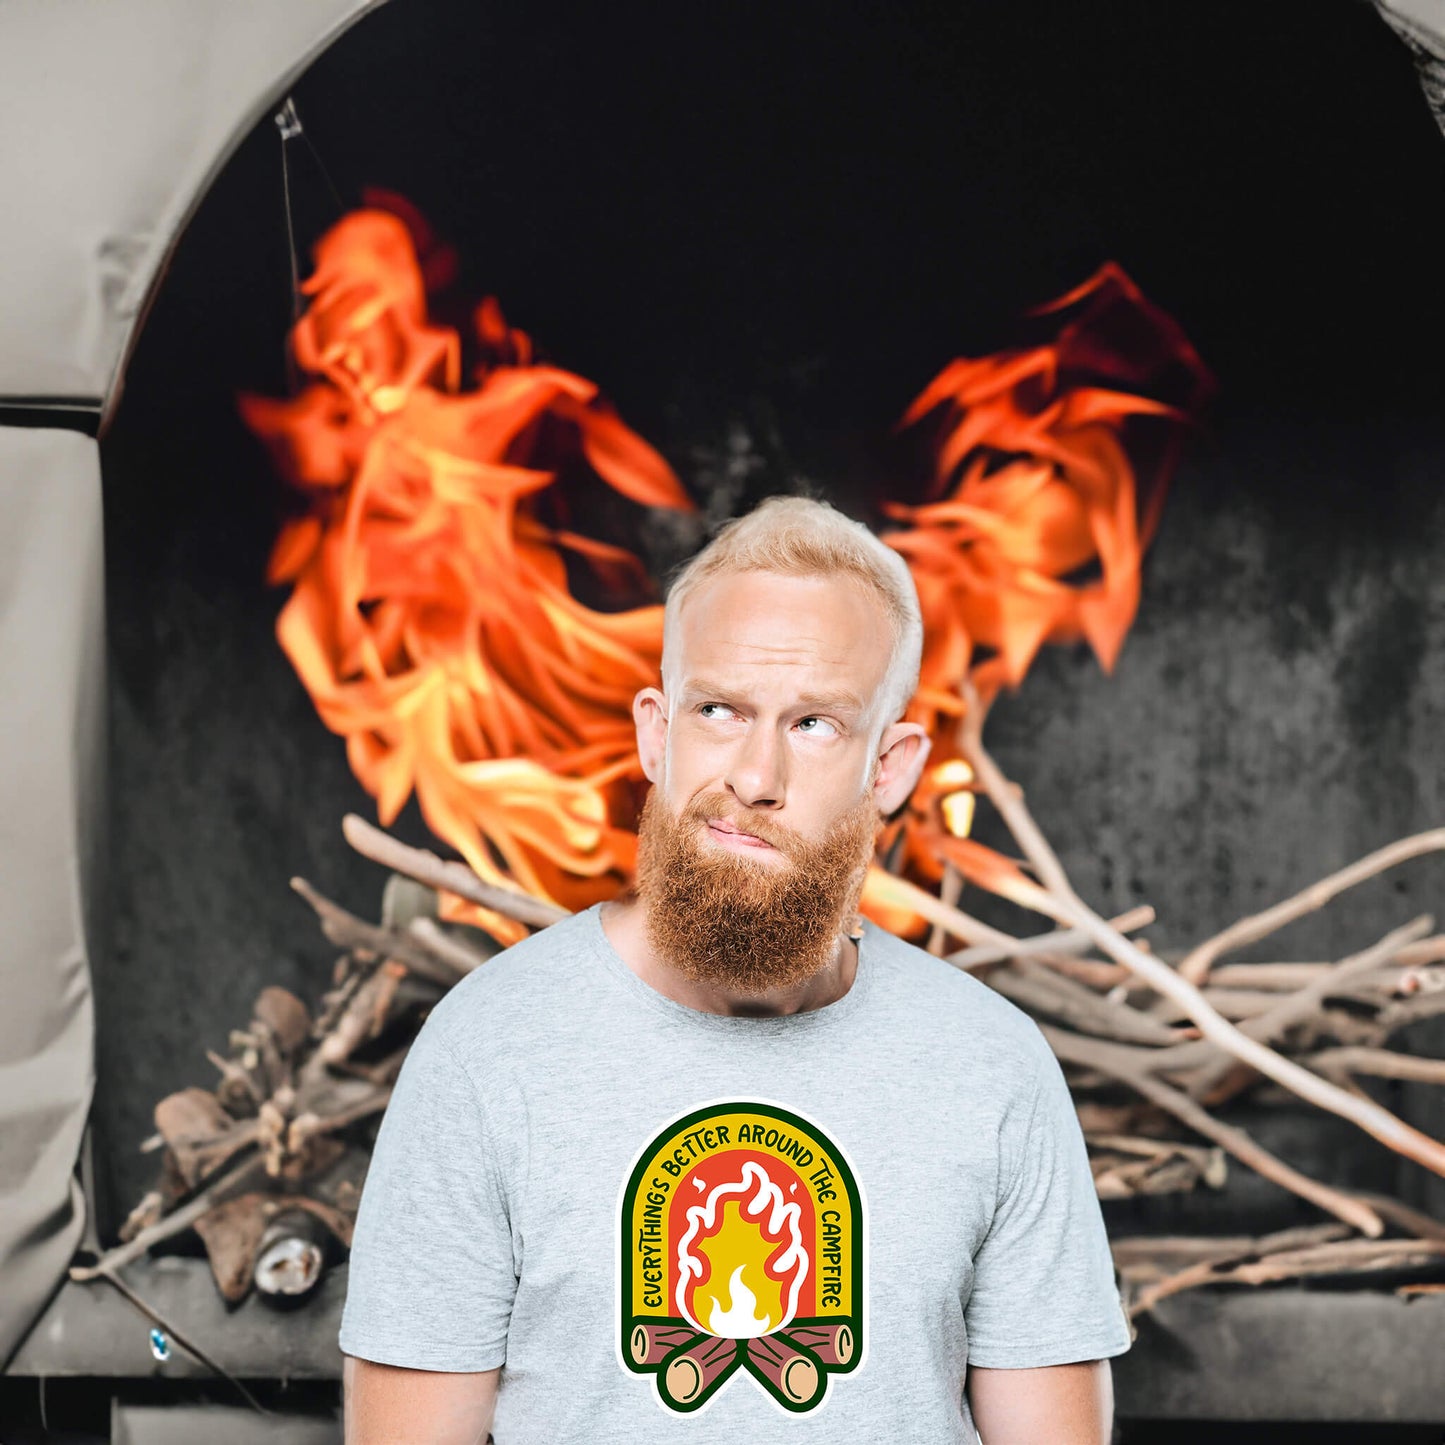 "Cozy tee featuring a campfire image, perfect for outdoor enthusiasts. Text says: 'Everything is better around the campfire.' Embrace the warmth and camaraderie!"